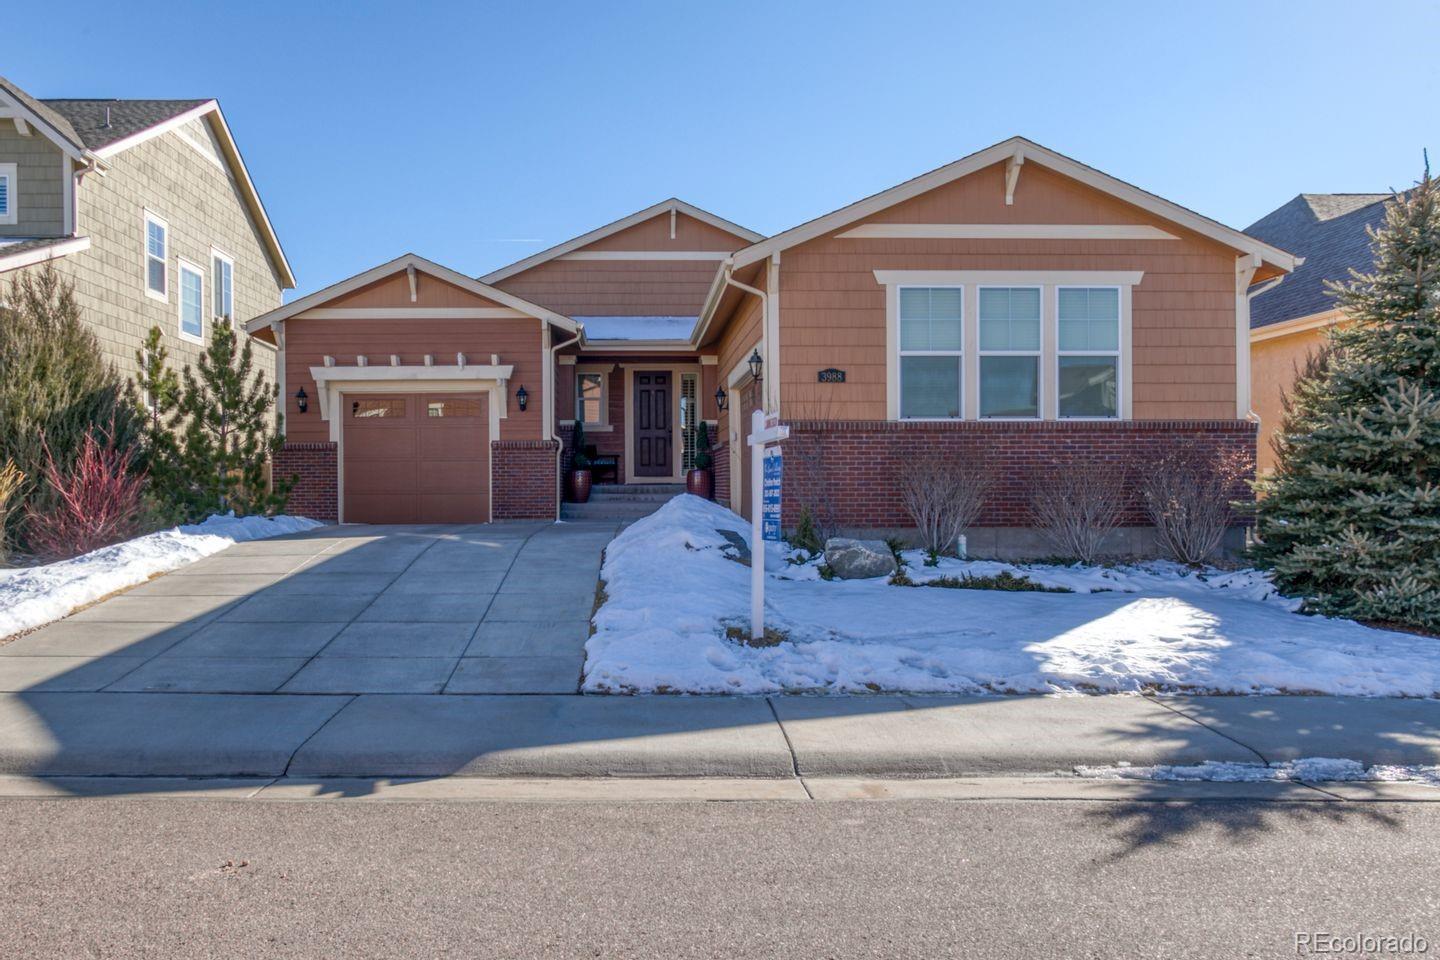 Report Image for 3988  Whitewing Lane,Castle Rock, Colorado